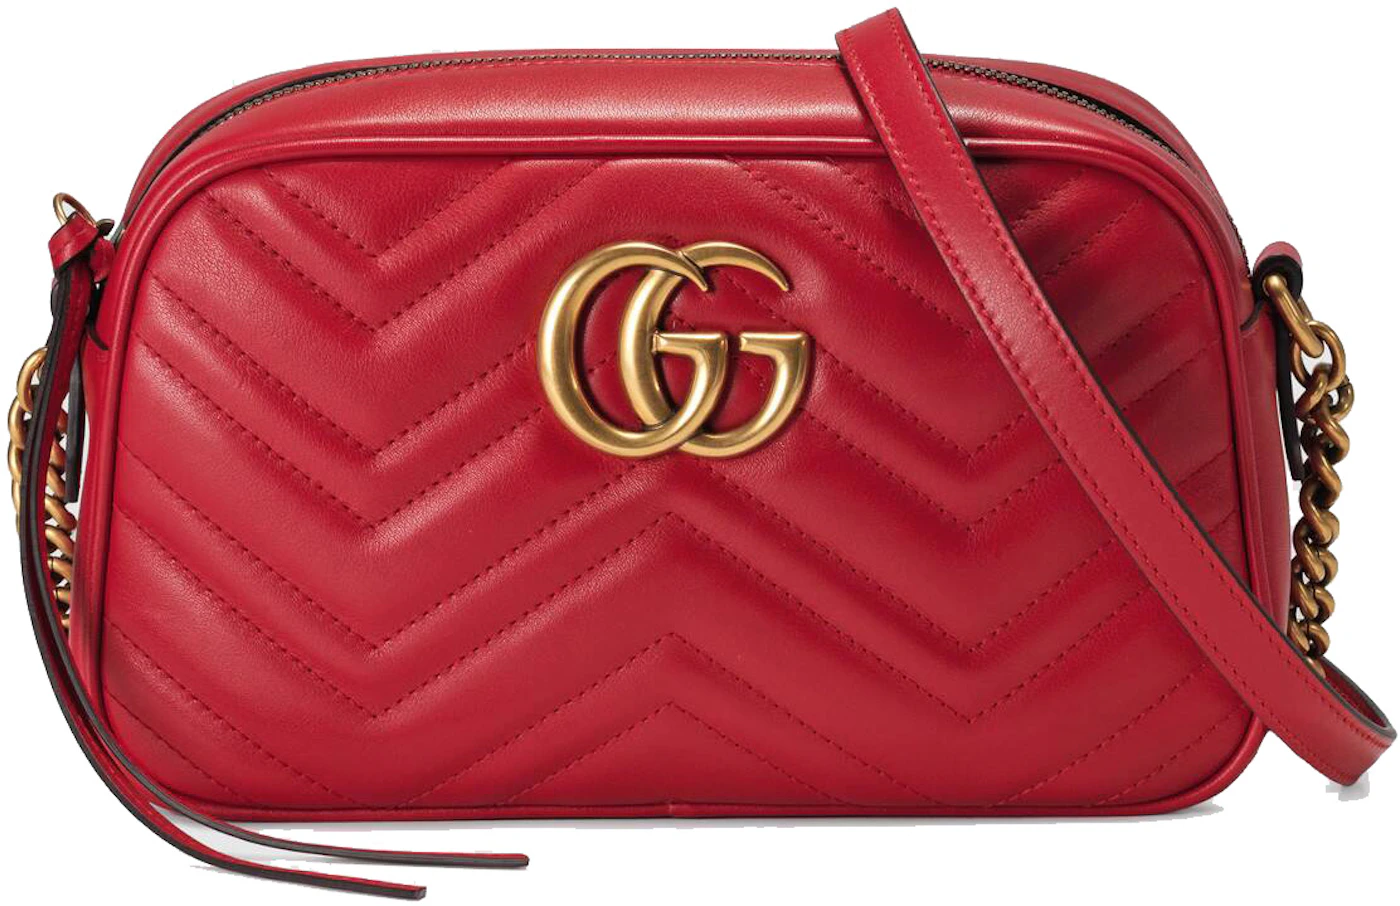 Gucci Calfskin Matelasse Small GG Marmont Shoulder Bag Hibiscus Red